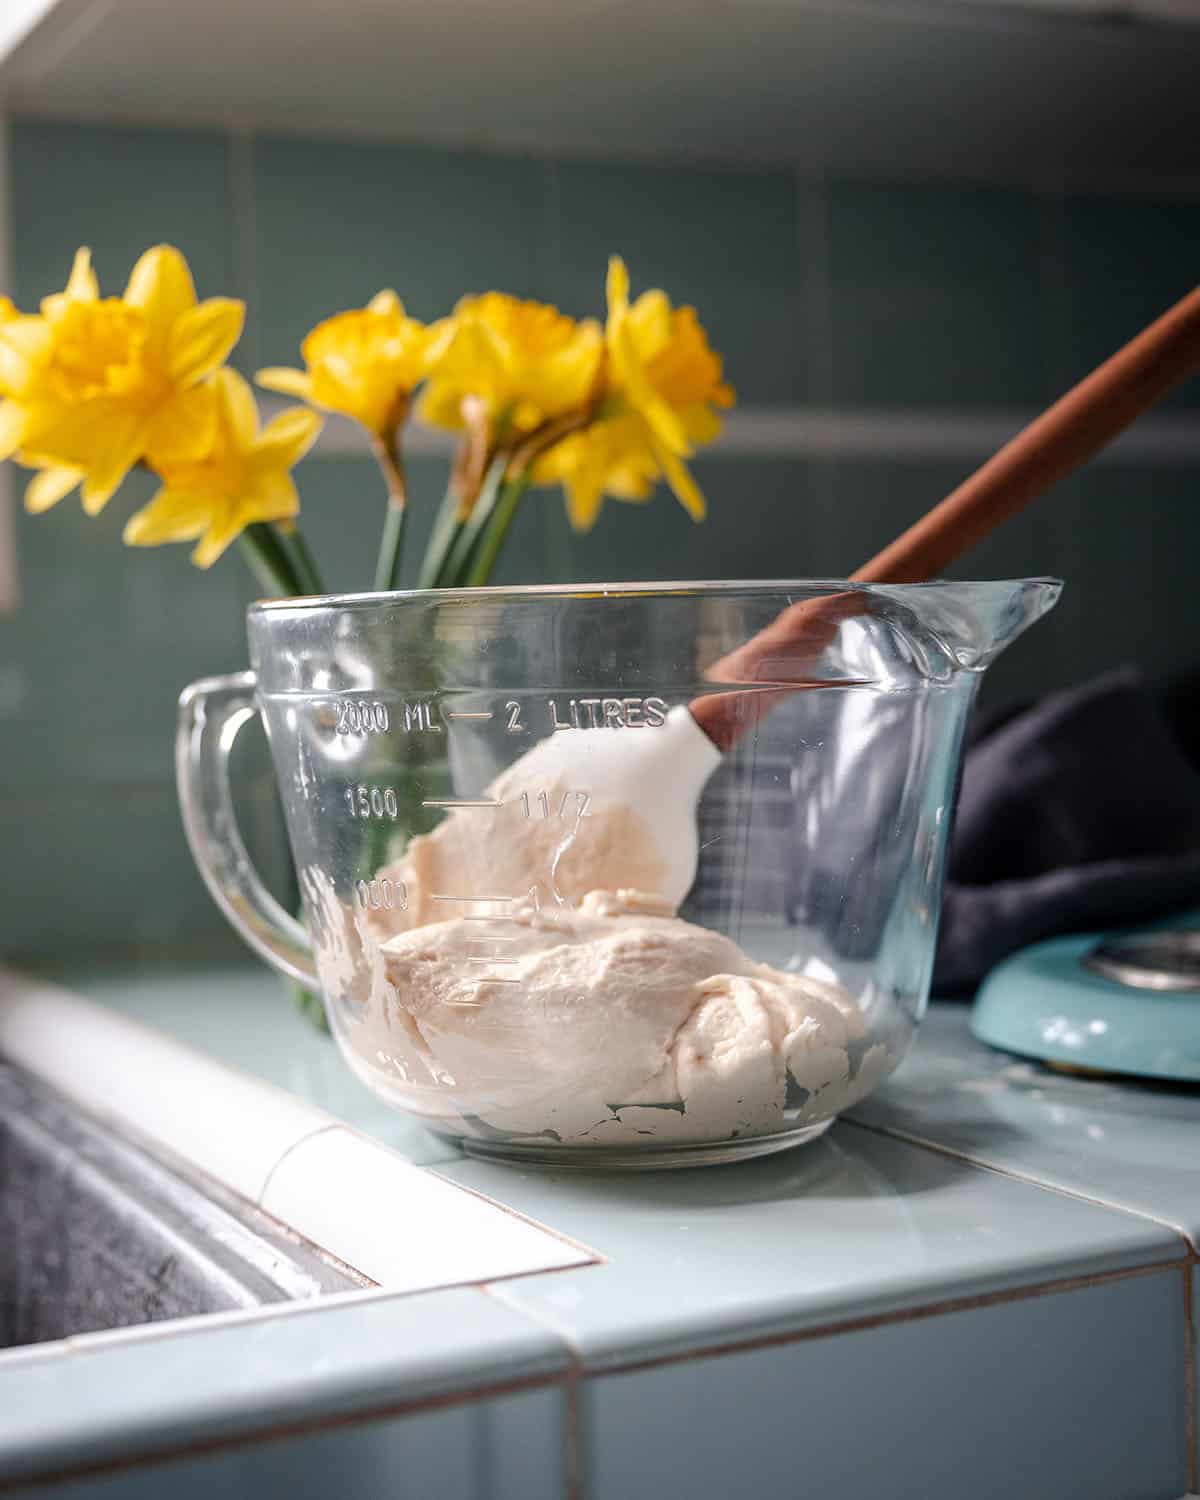 A glass measuring bowl with a rubber spatula with a wooden handle in it, stirring together the sourdough starter, flour, and yogurt. On a countertop, with yellow daffodils in the background.